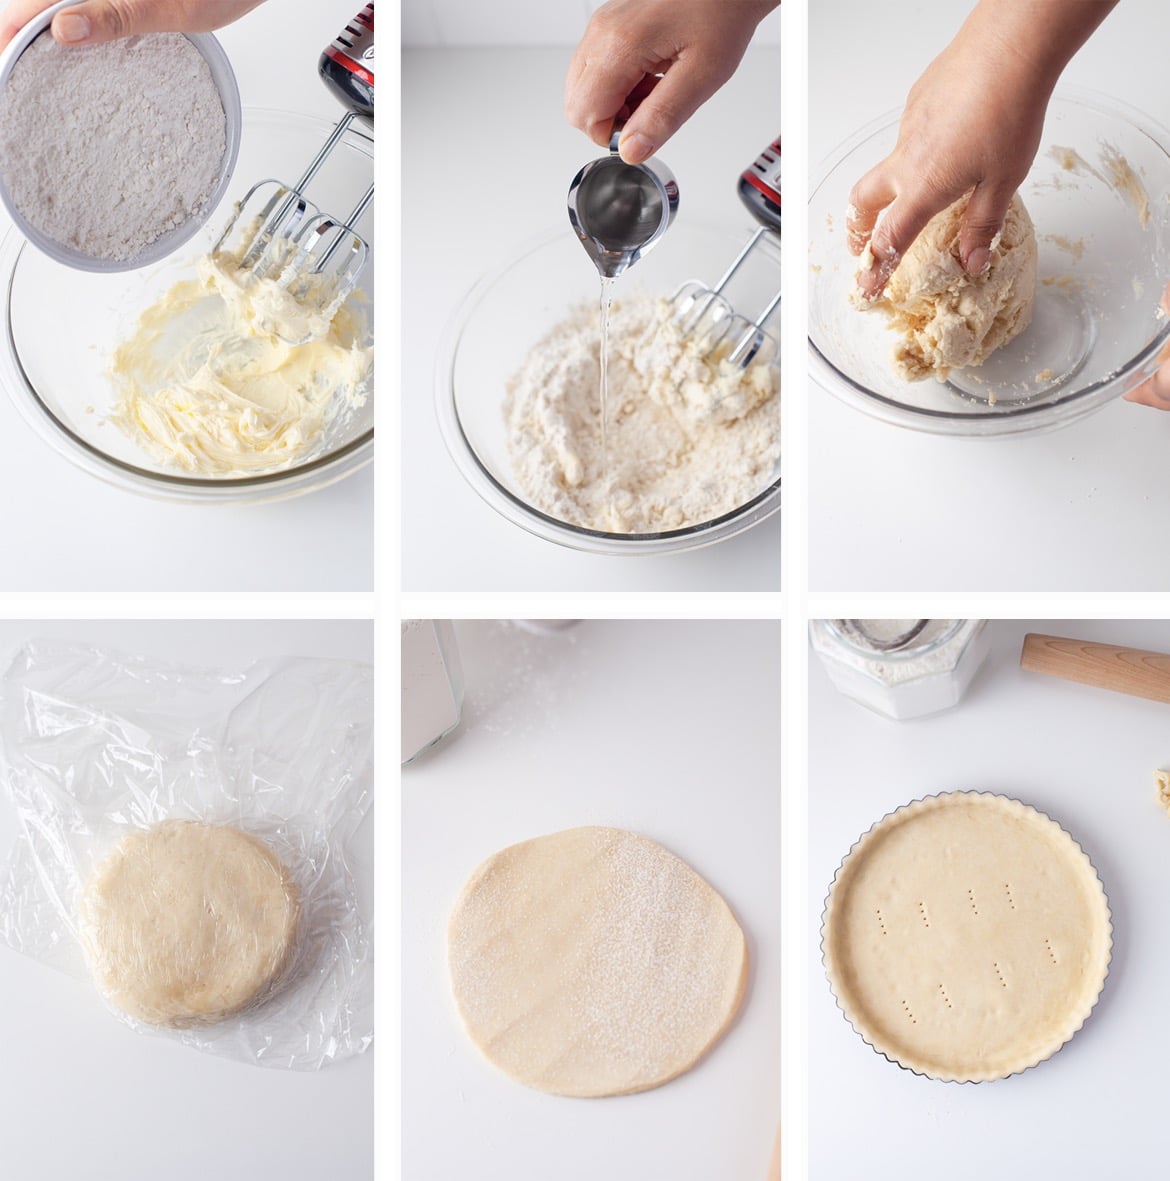 Step by step photos showing how to make the tart dough for Raspberry Tart on a white countertop